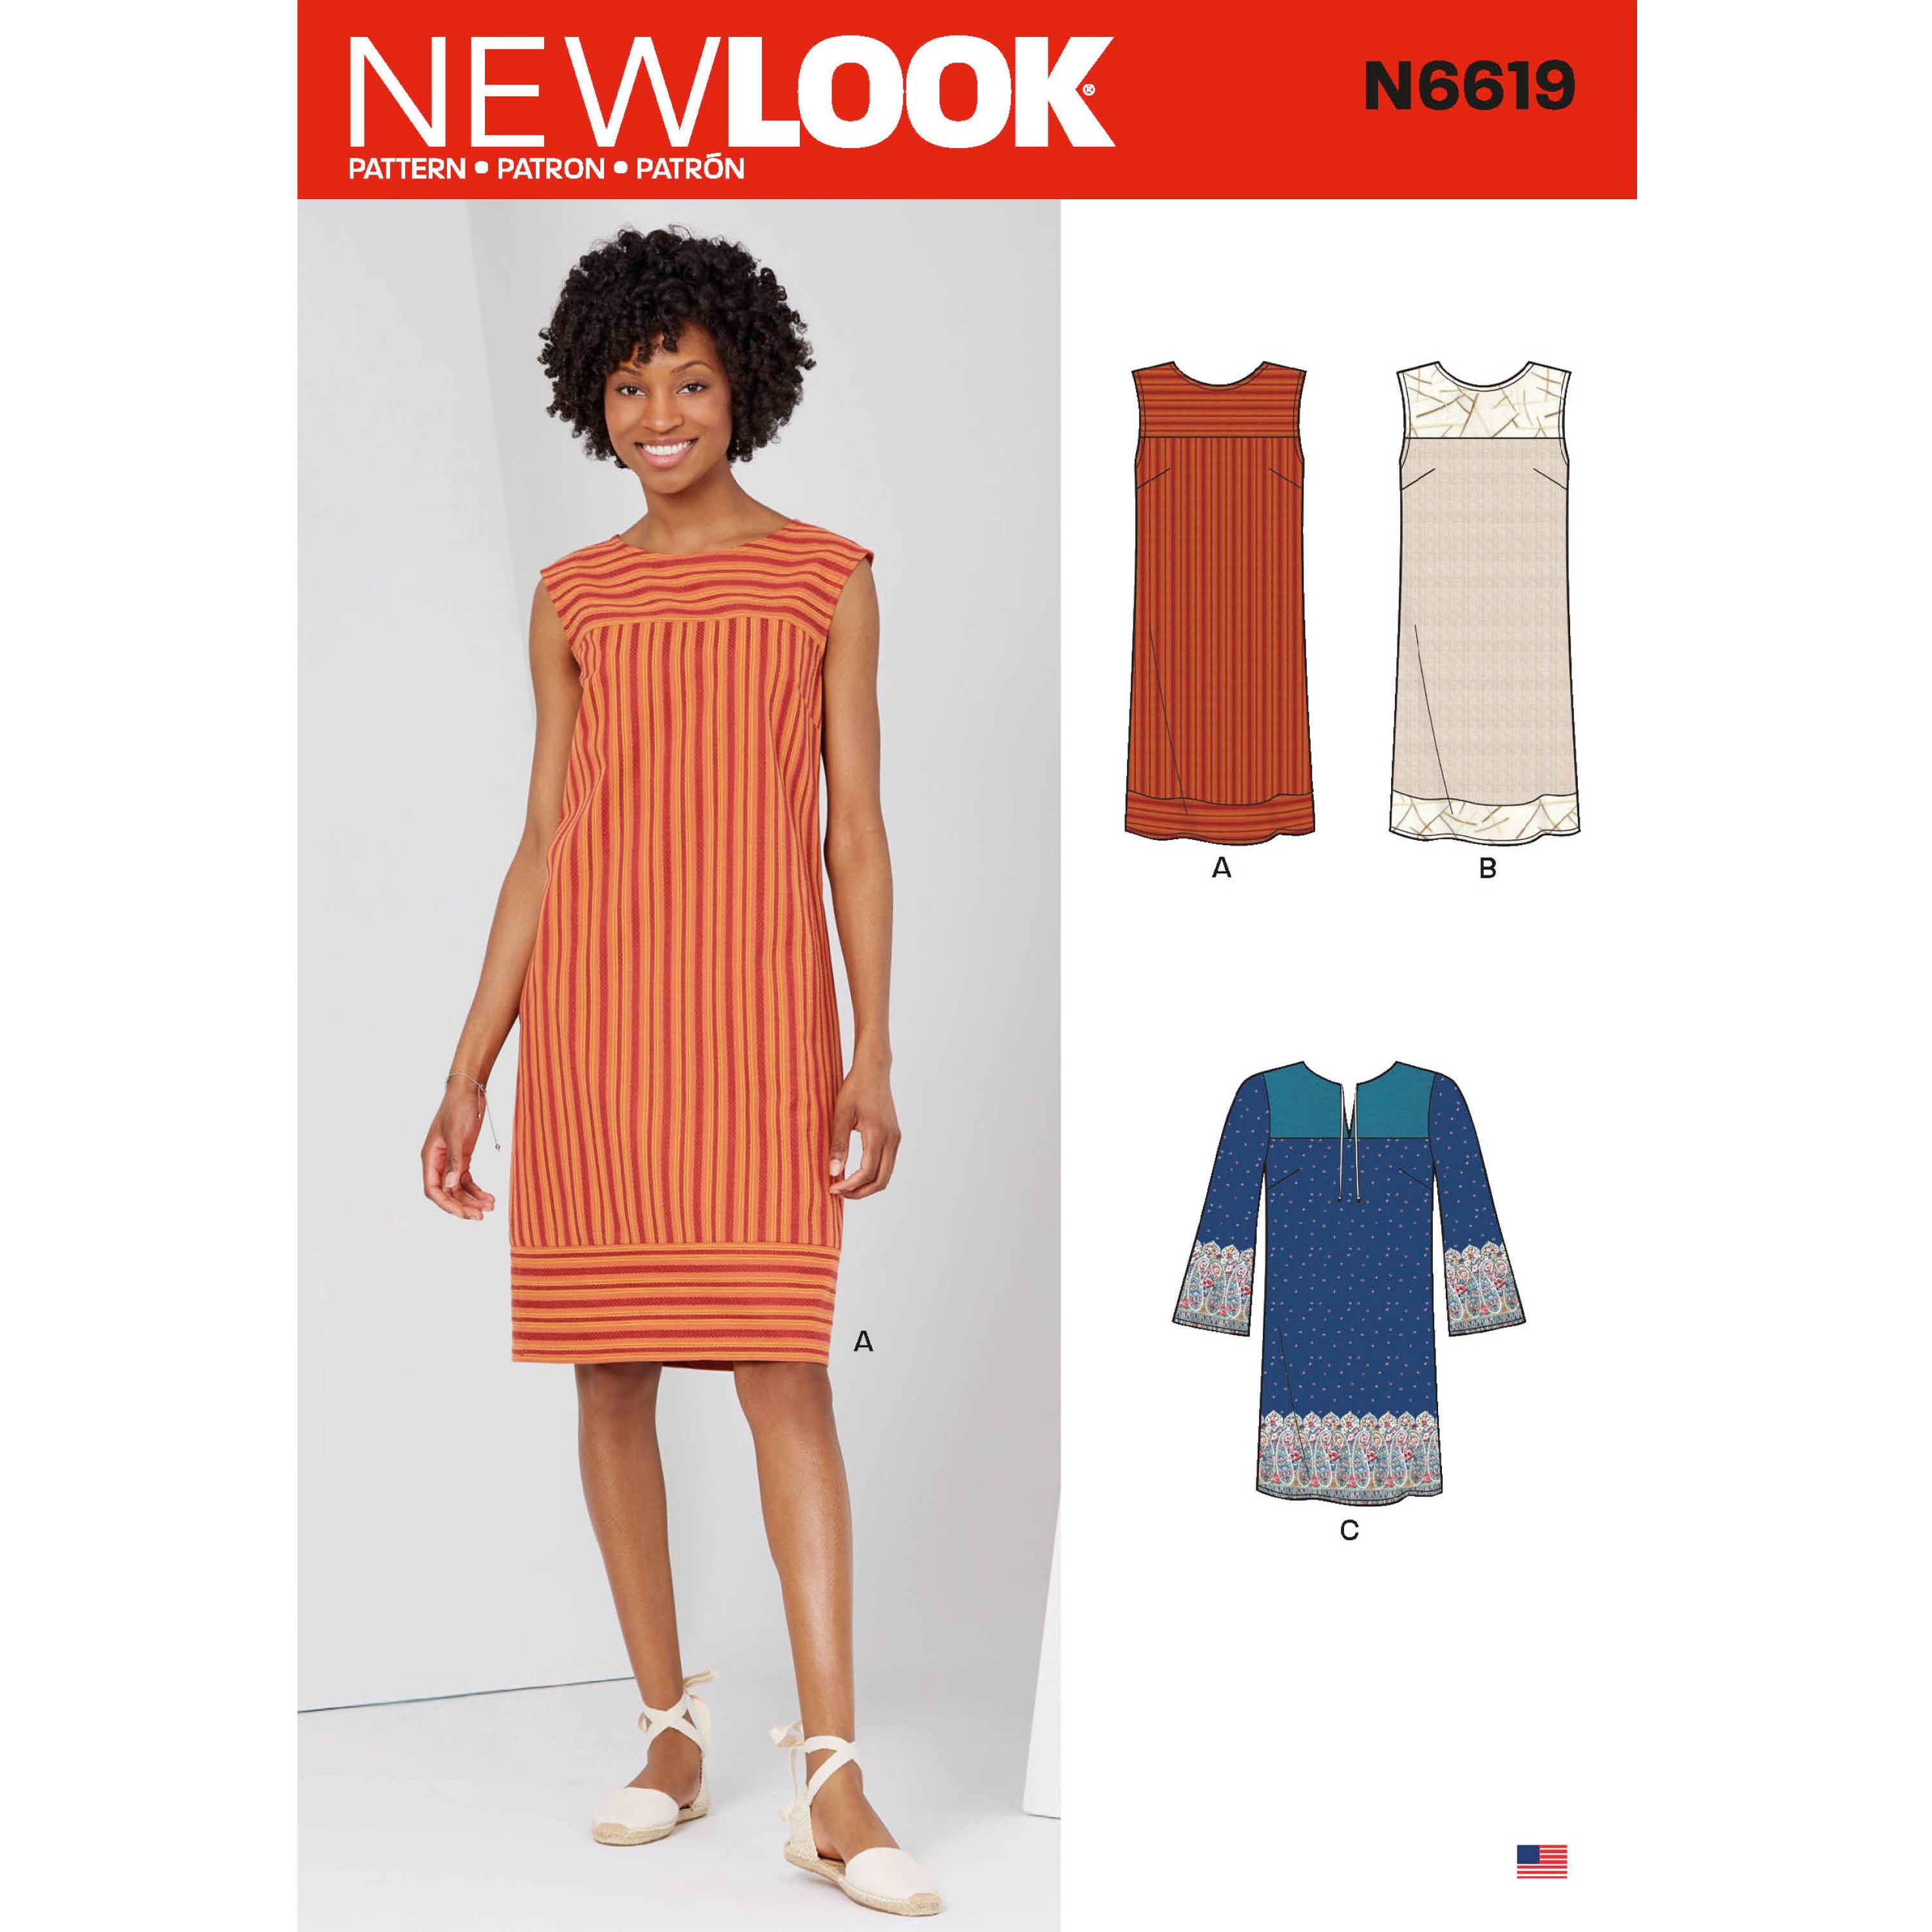 new look dresses size 20